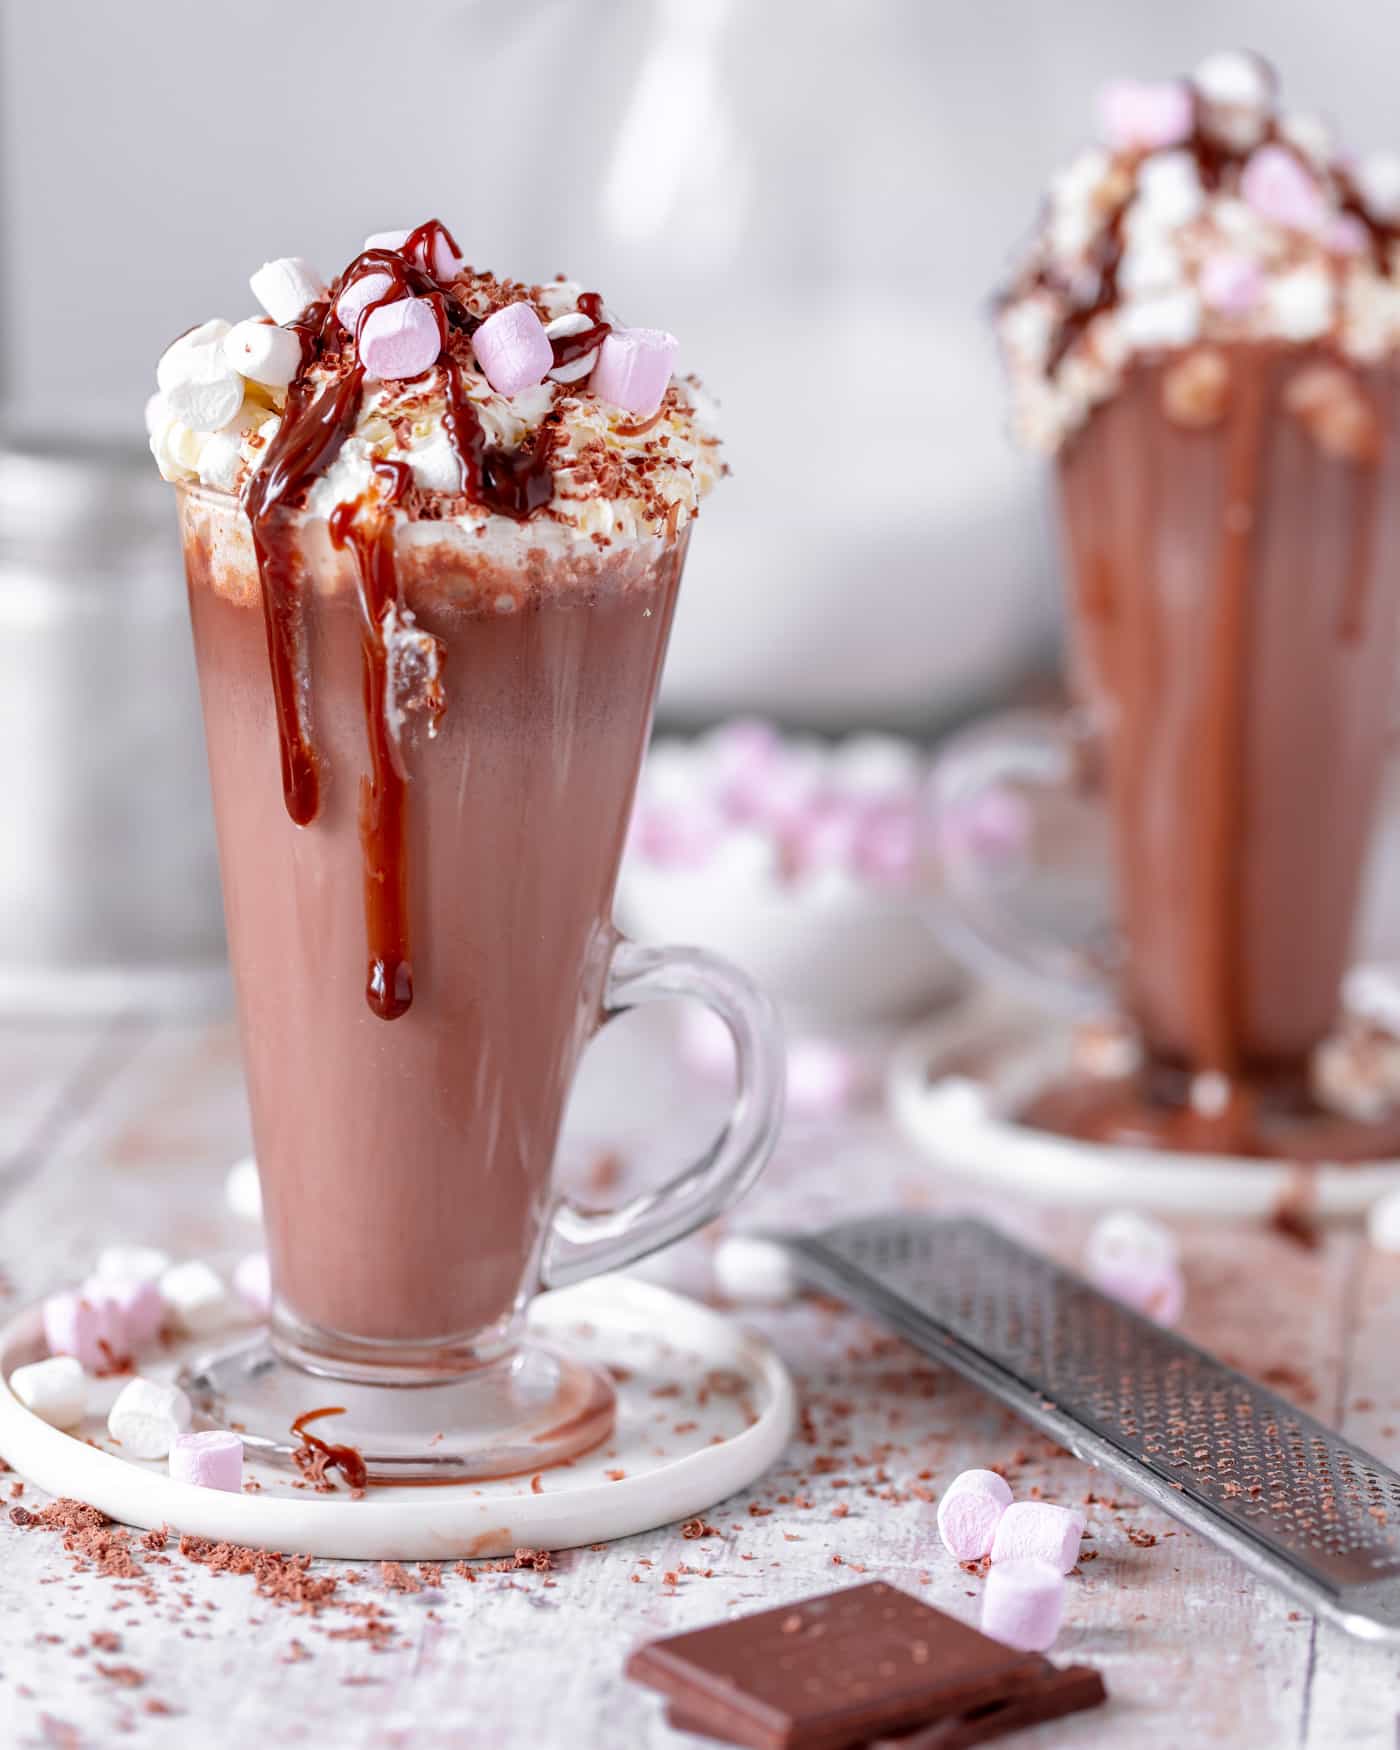 hot chocolate in a glass mug sat on a white small plate with mini marshmallows and grated chocolate chunks in the foreground. A long grater lies to the side and another glass tall mug of hot chocolate is in the background